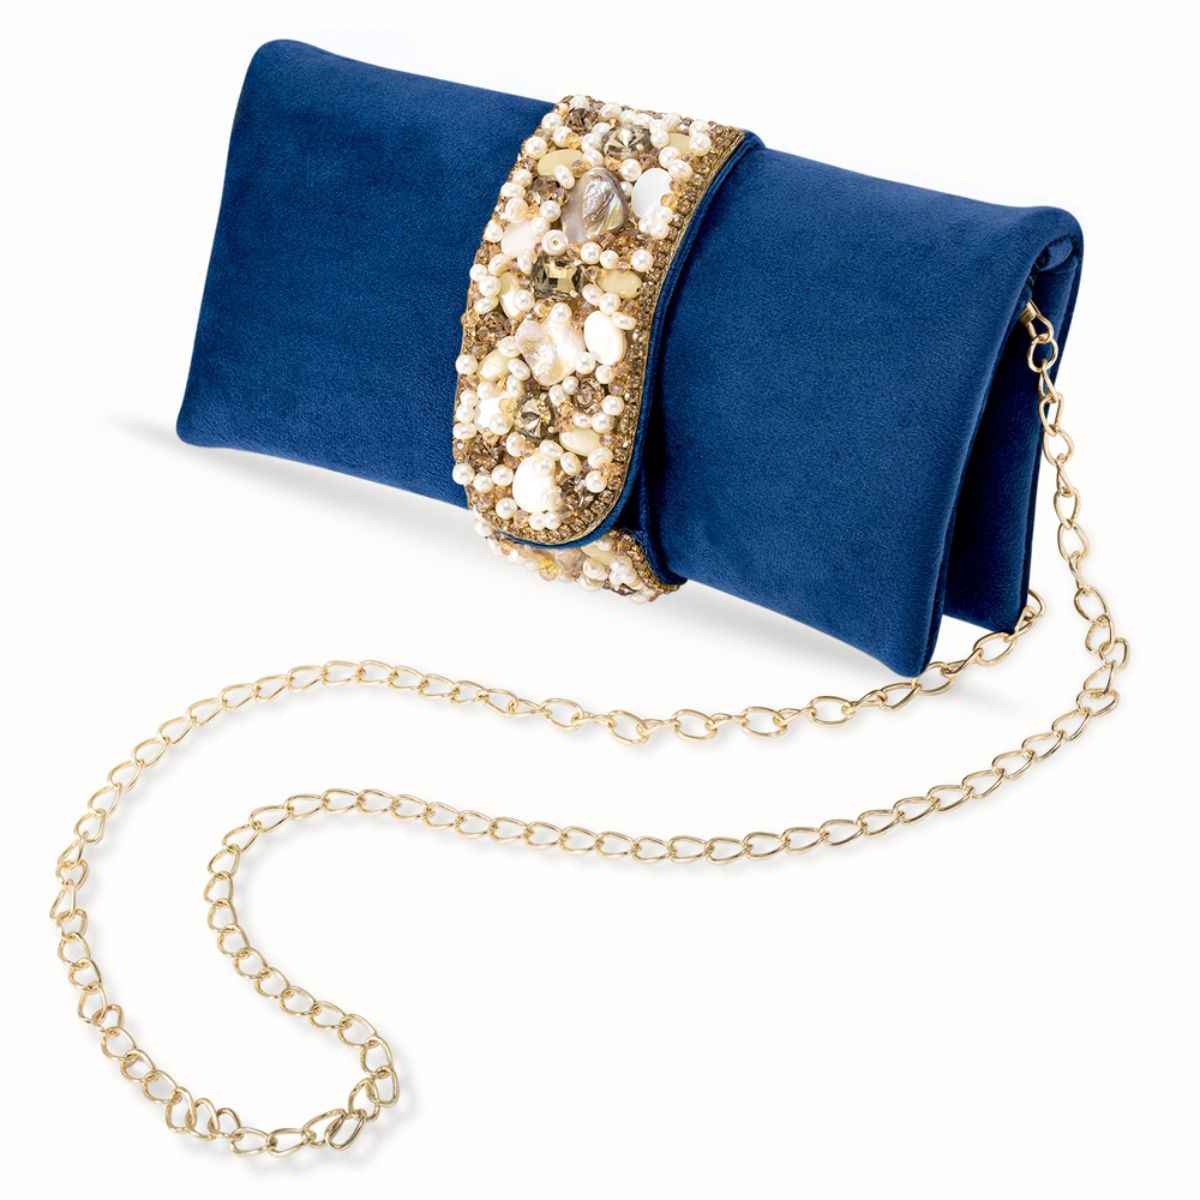 Small Navy Blue Polkadot Box Clutch with Crystal Push-Button